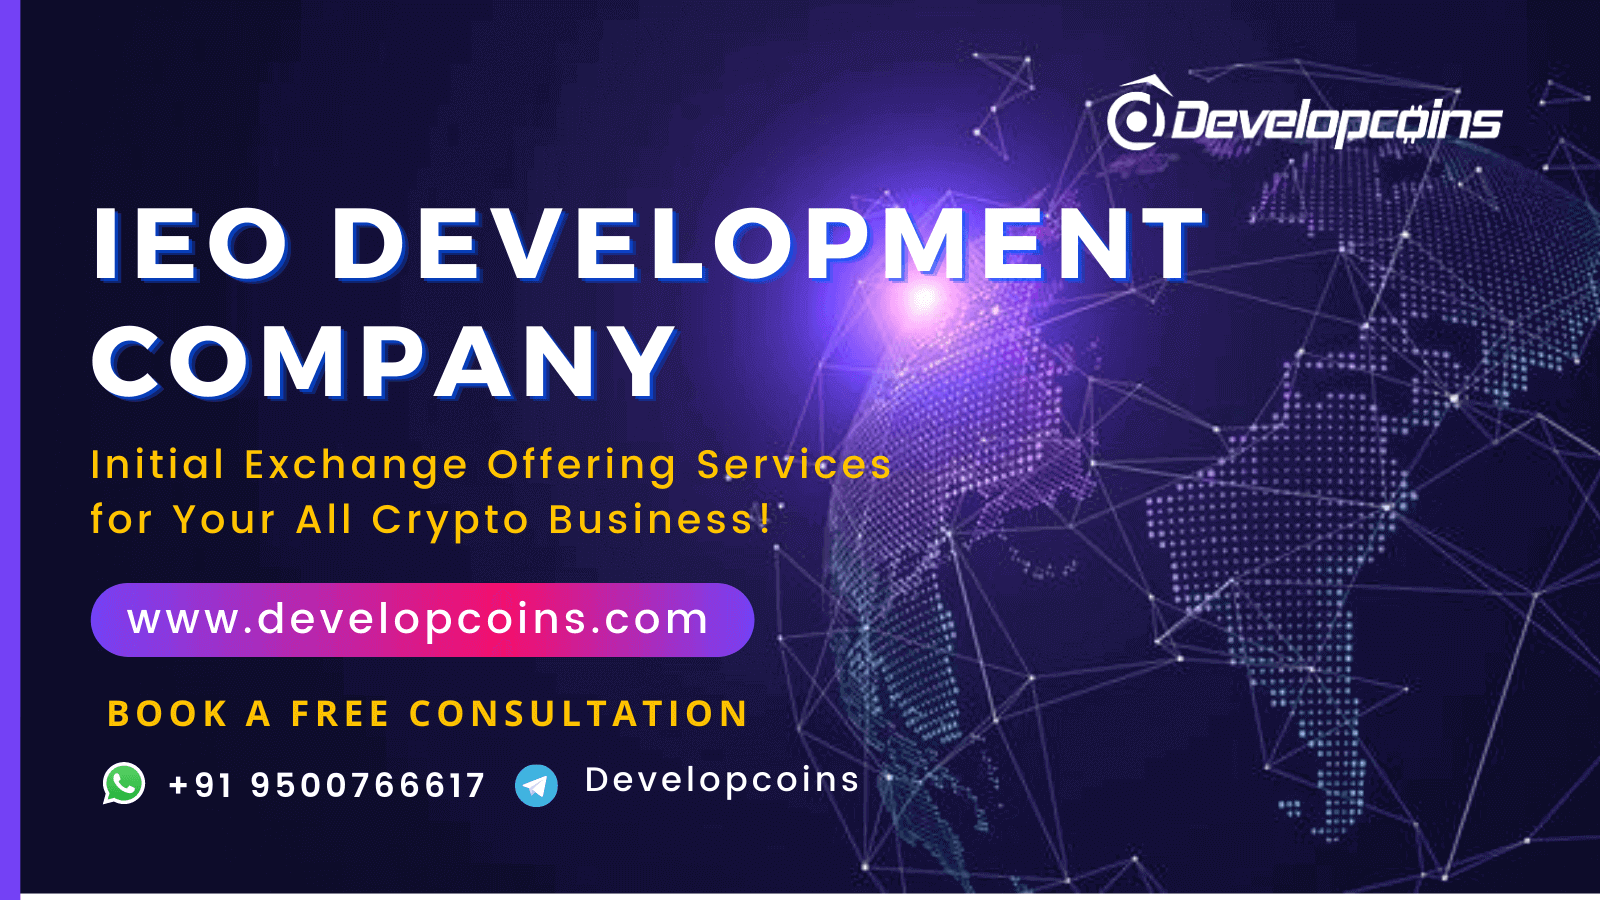 IEO(Initial Exchange Offering) Development Company & Services